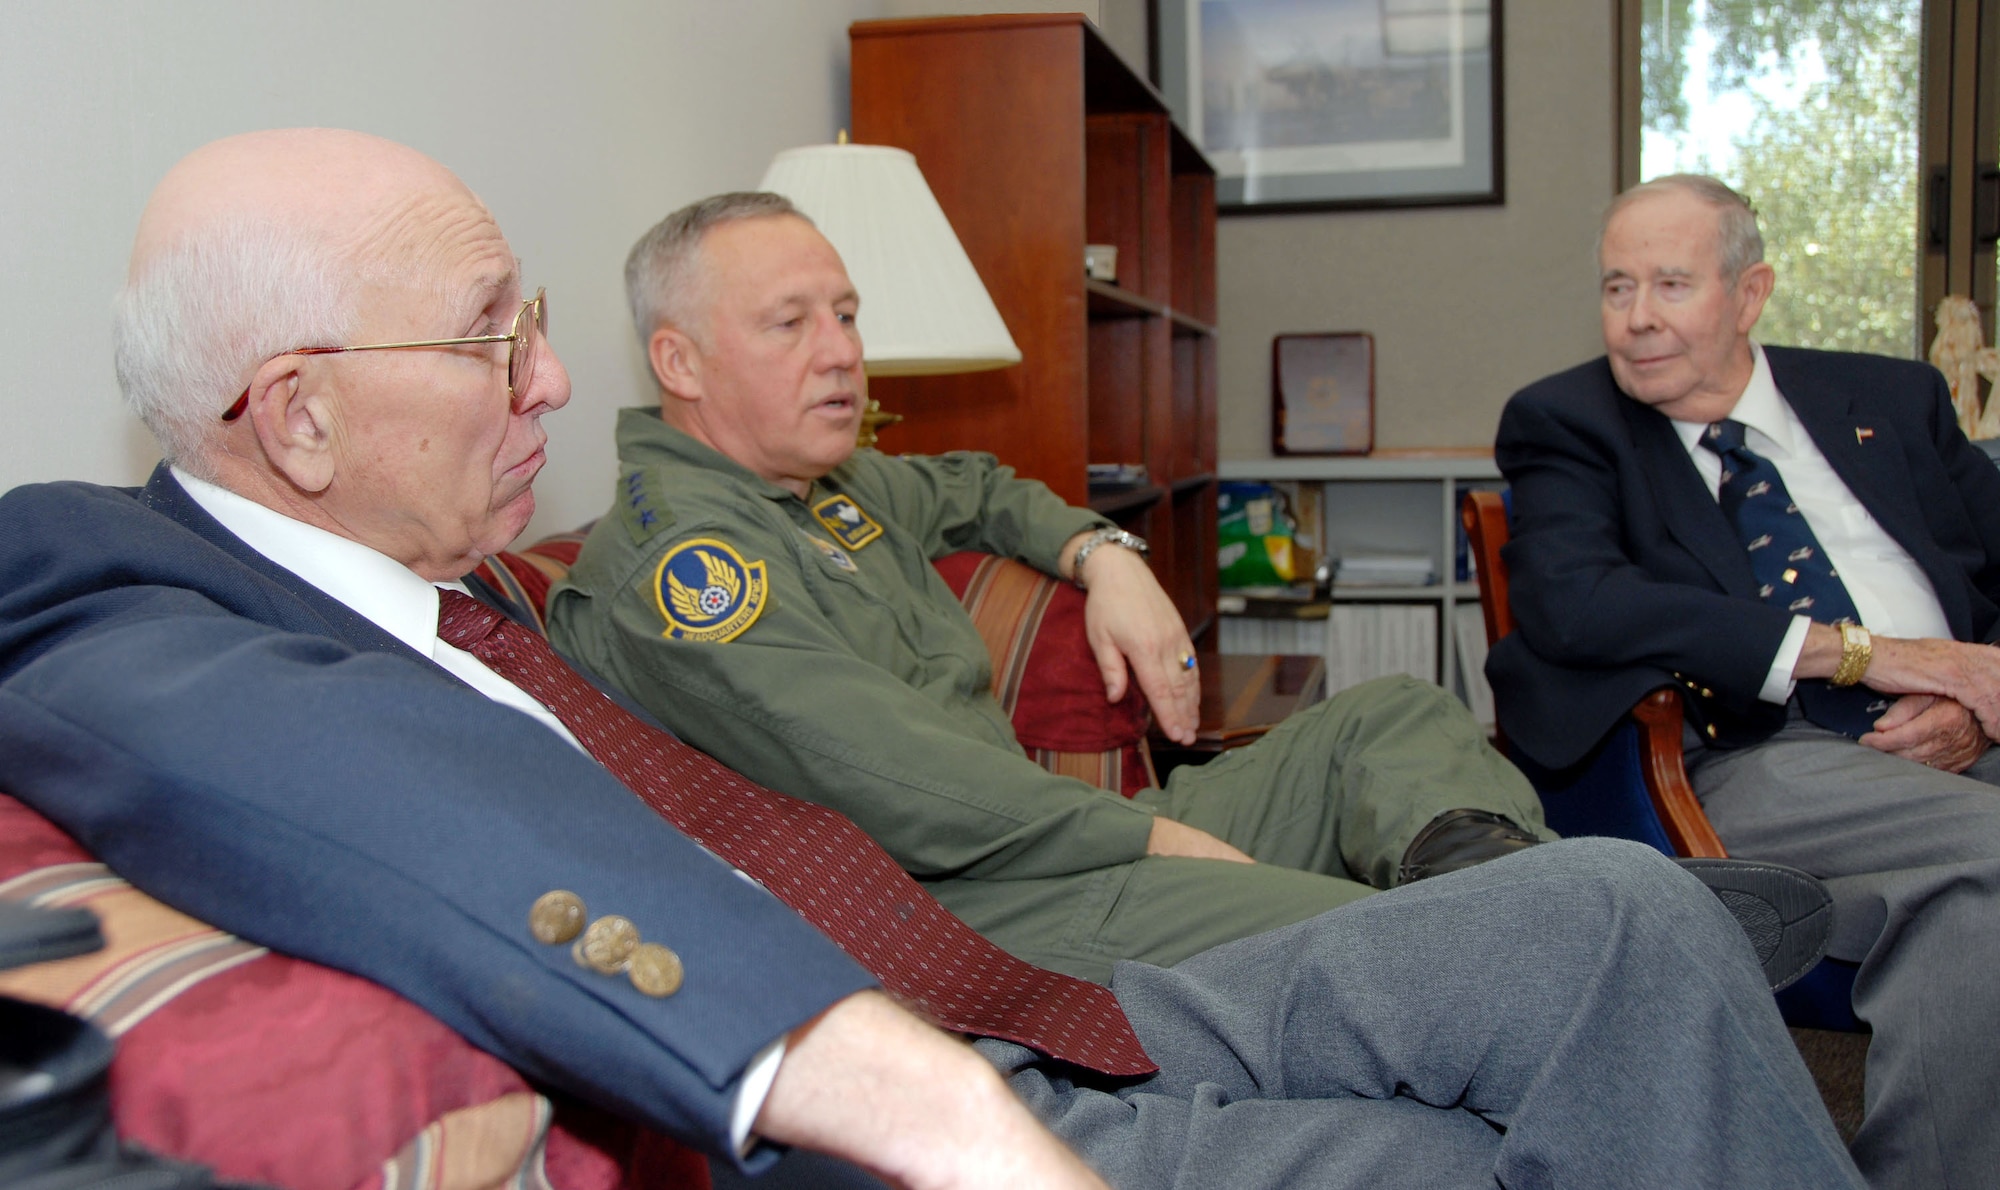 Gen. Bruce Carlson, commander, Air Force Materiel Command, talks with retired Lt. Cols. William Desmond Jr. (left) and Philip Alker during a visit to Maxwell Air Force Base, Ala., April 17. General Carlson reunited with his two former Det. 420 - University of Minnesota Duluth ROTC instructors after more than 36 years. General Carlson was a distinguished graduate from the detachment in 1971. (Air Force photo by Tech. Sgt. Scott Moorman)